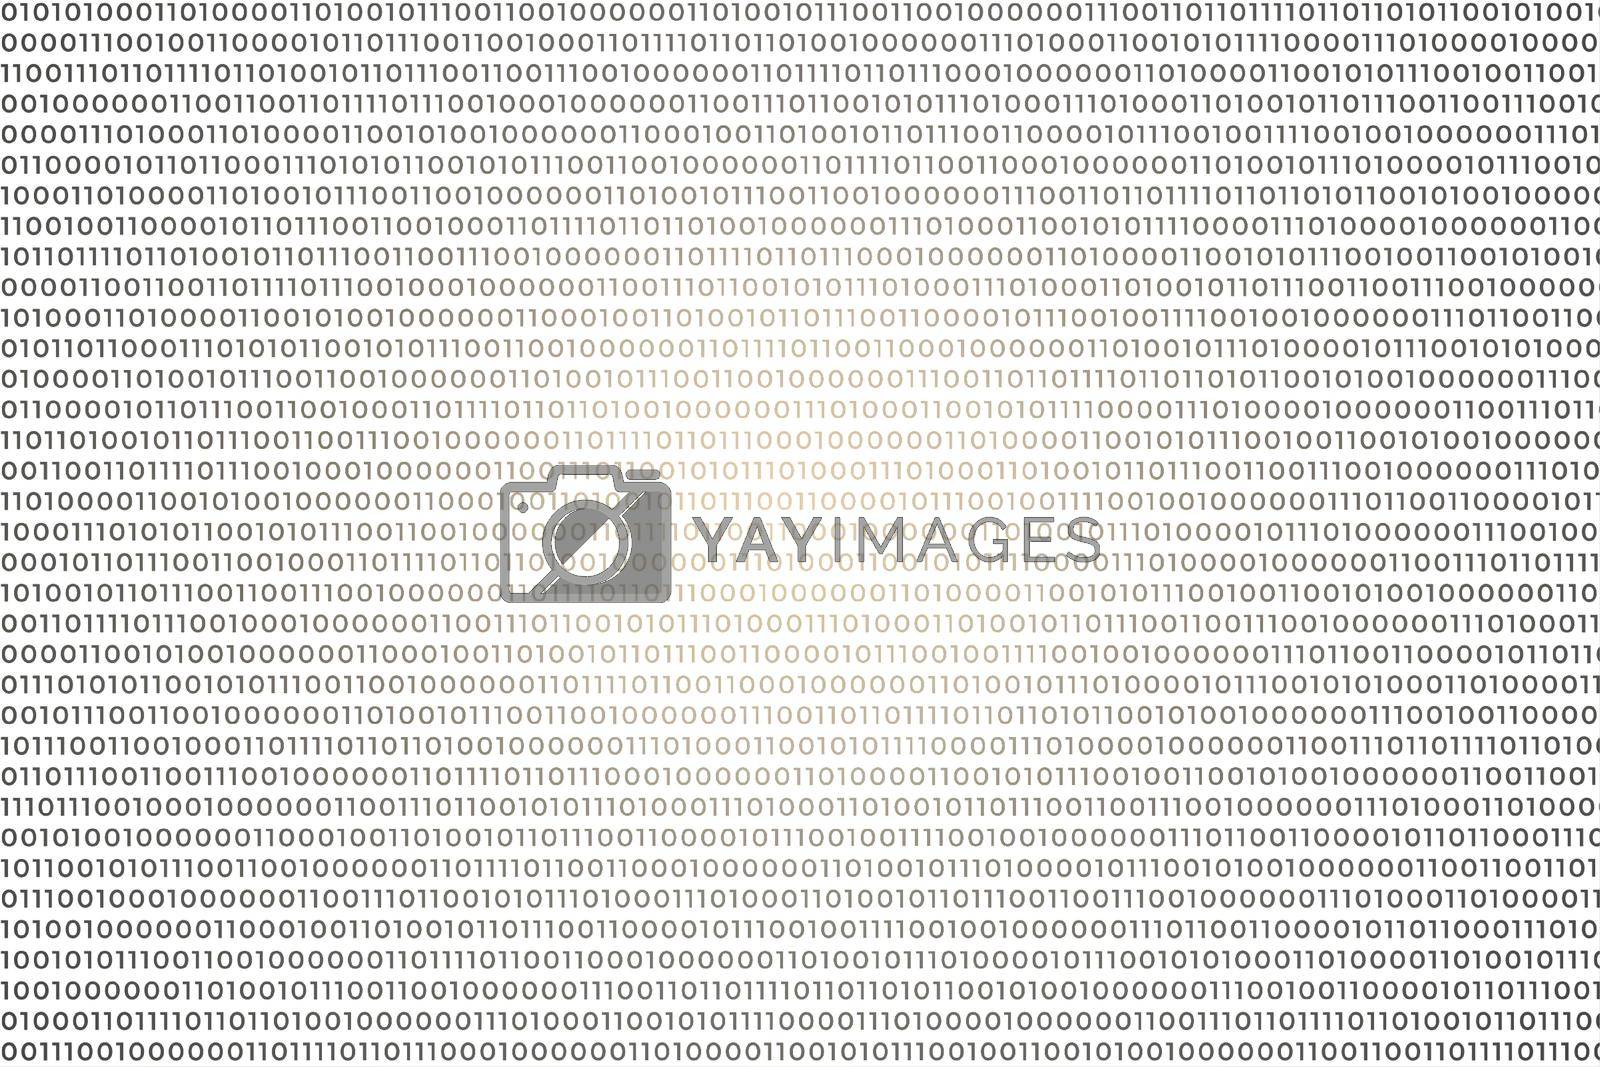 Royalty free image of white background with binary code numbers by mstjahanara